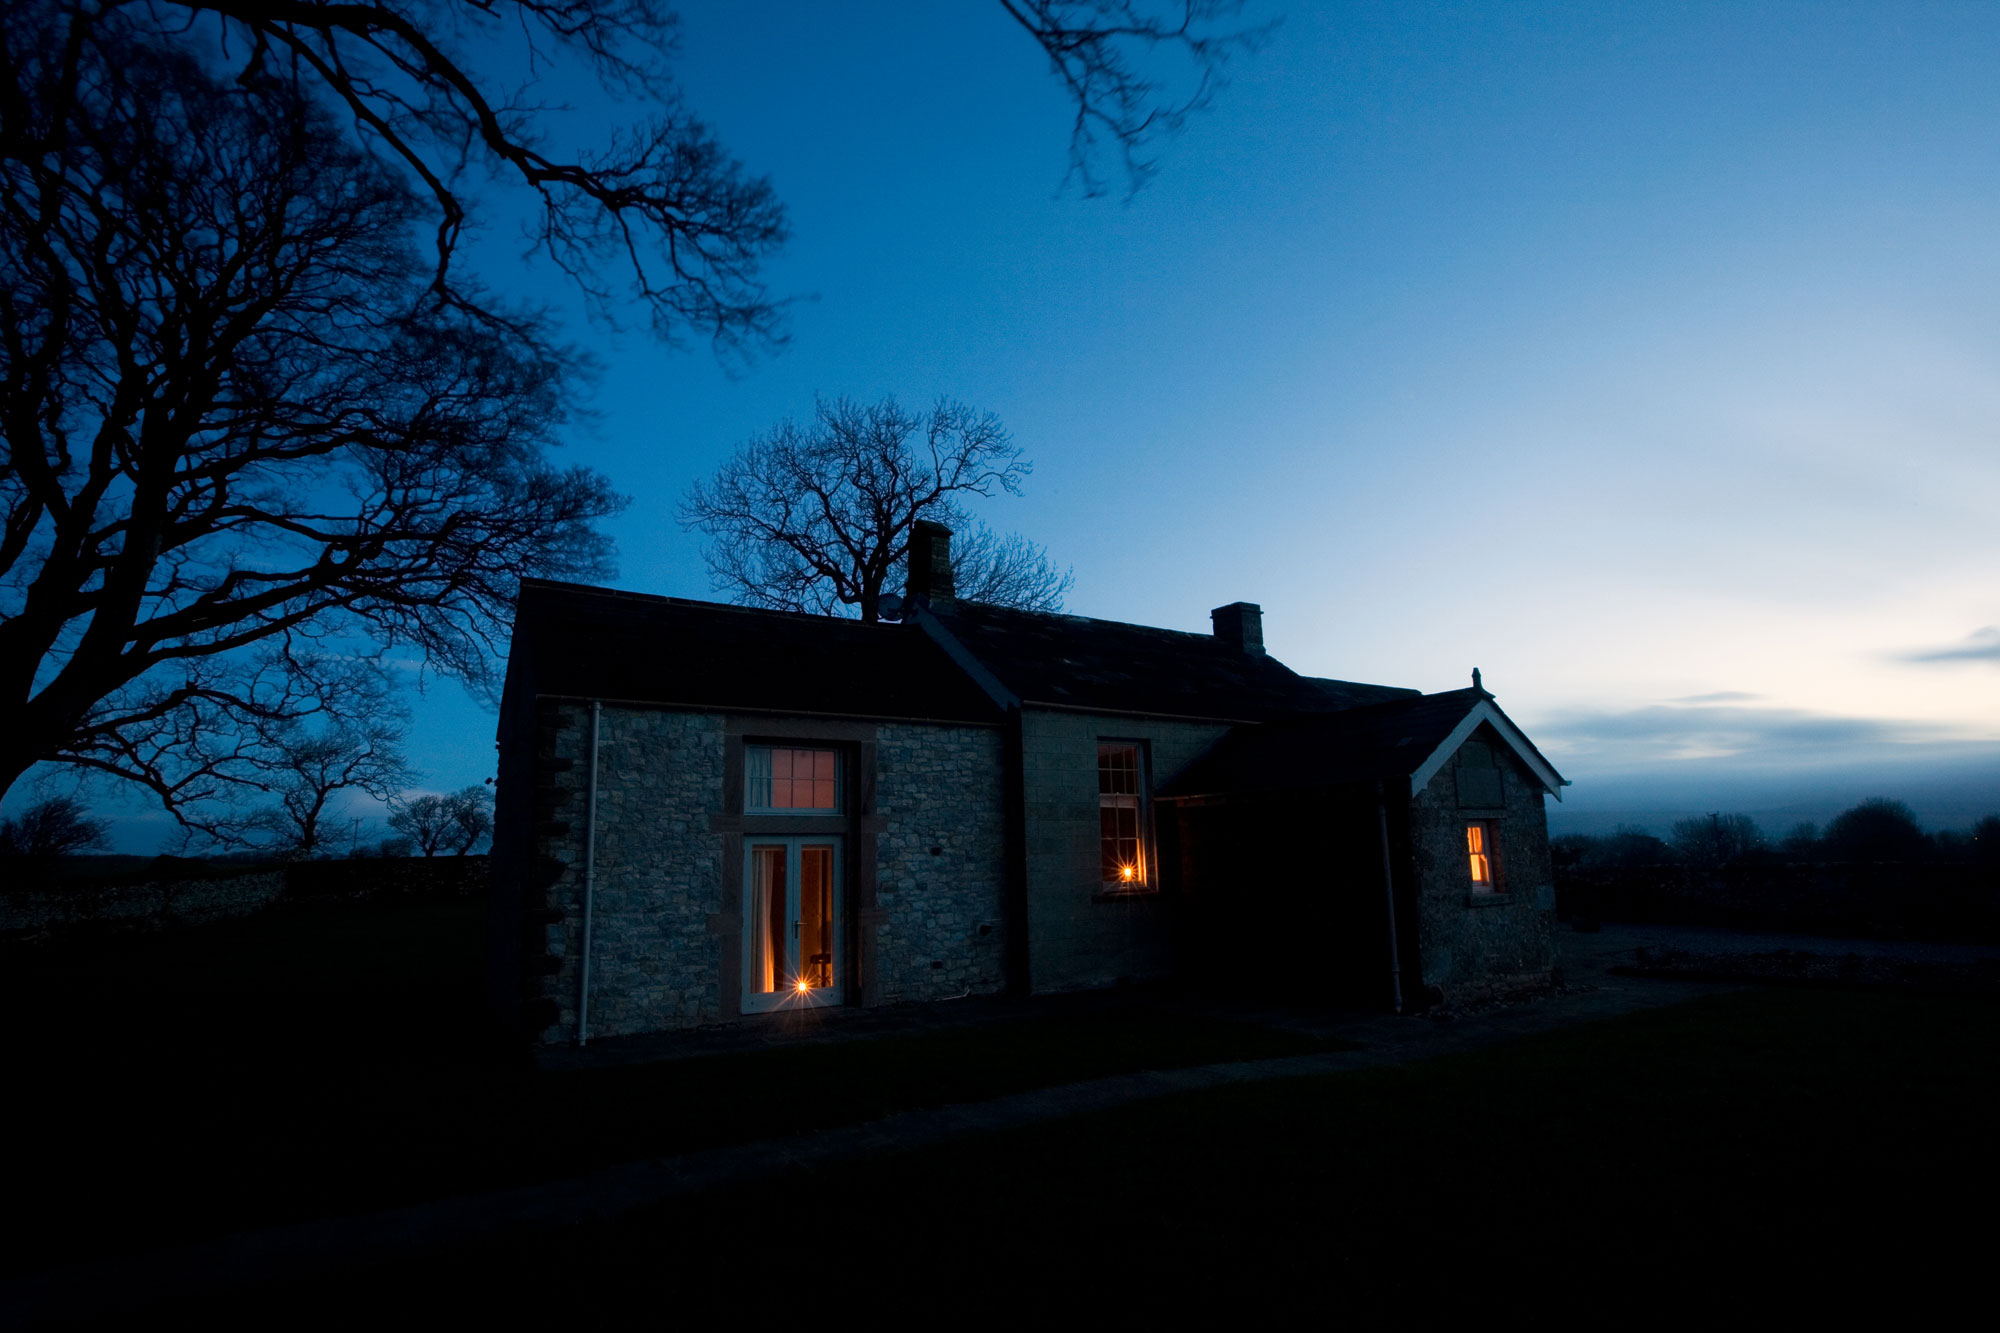 The schoolhouse at dawn